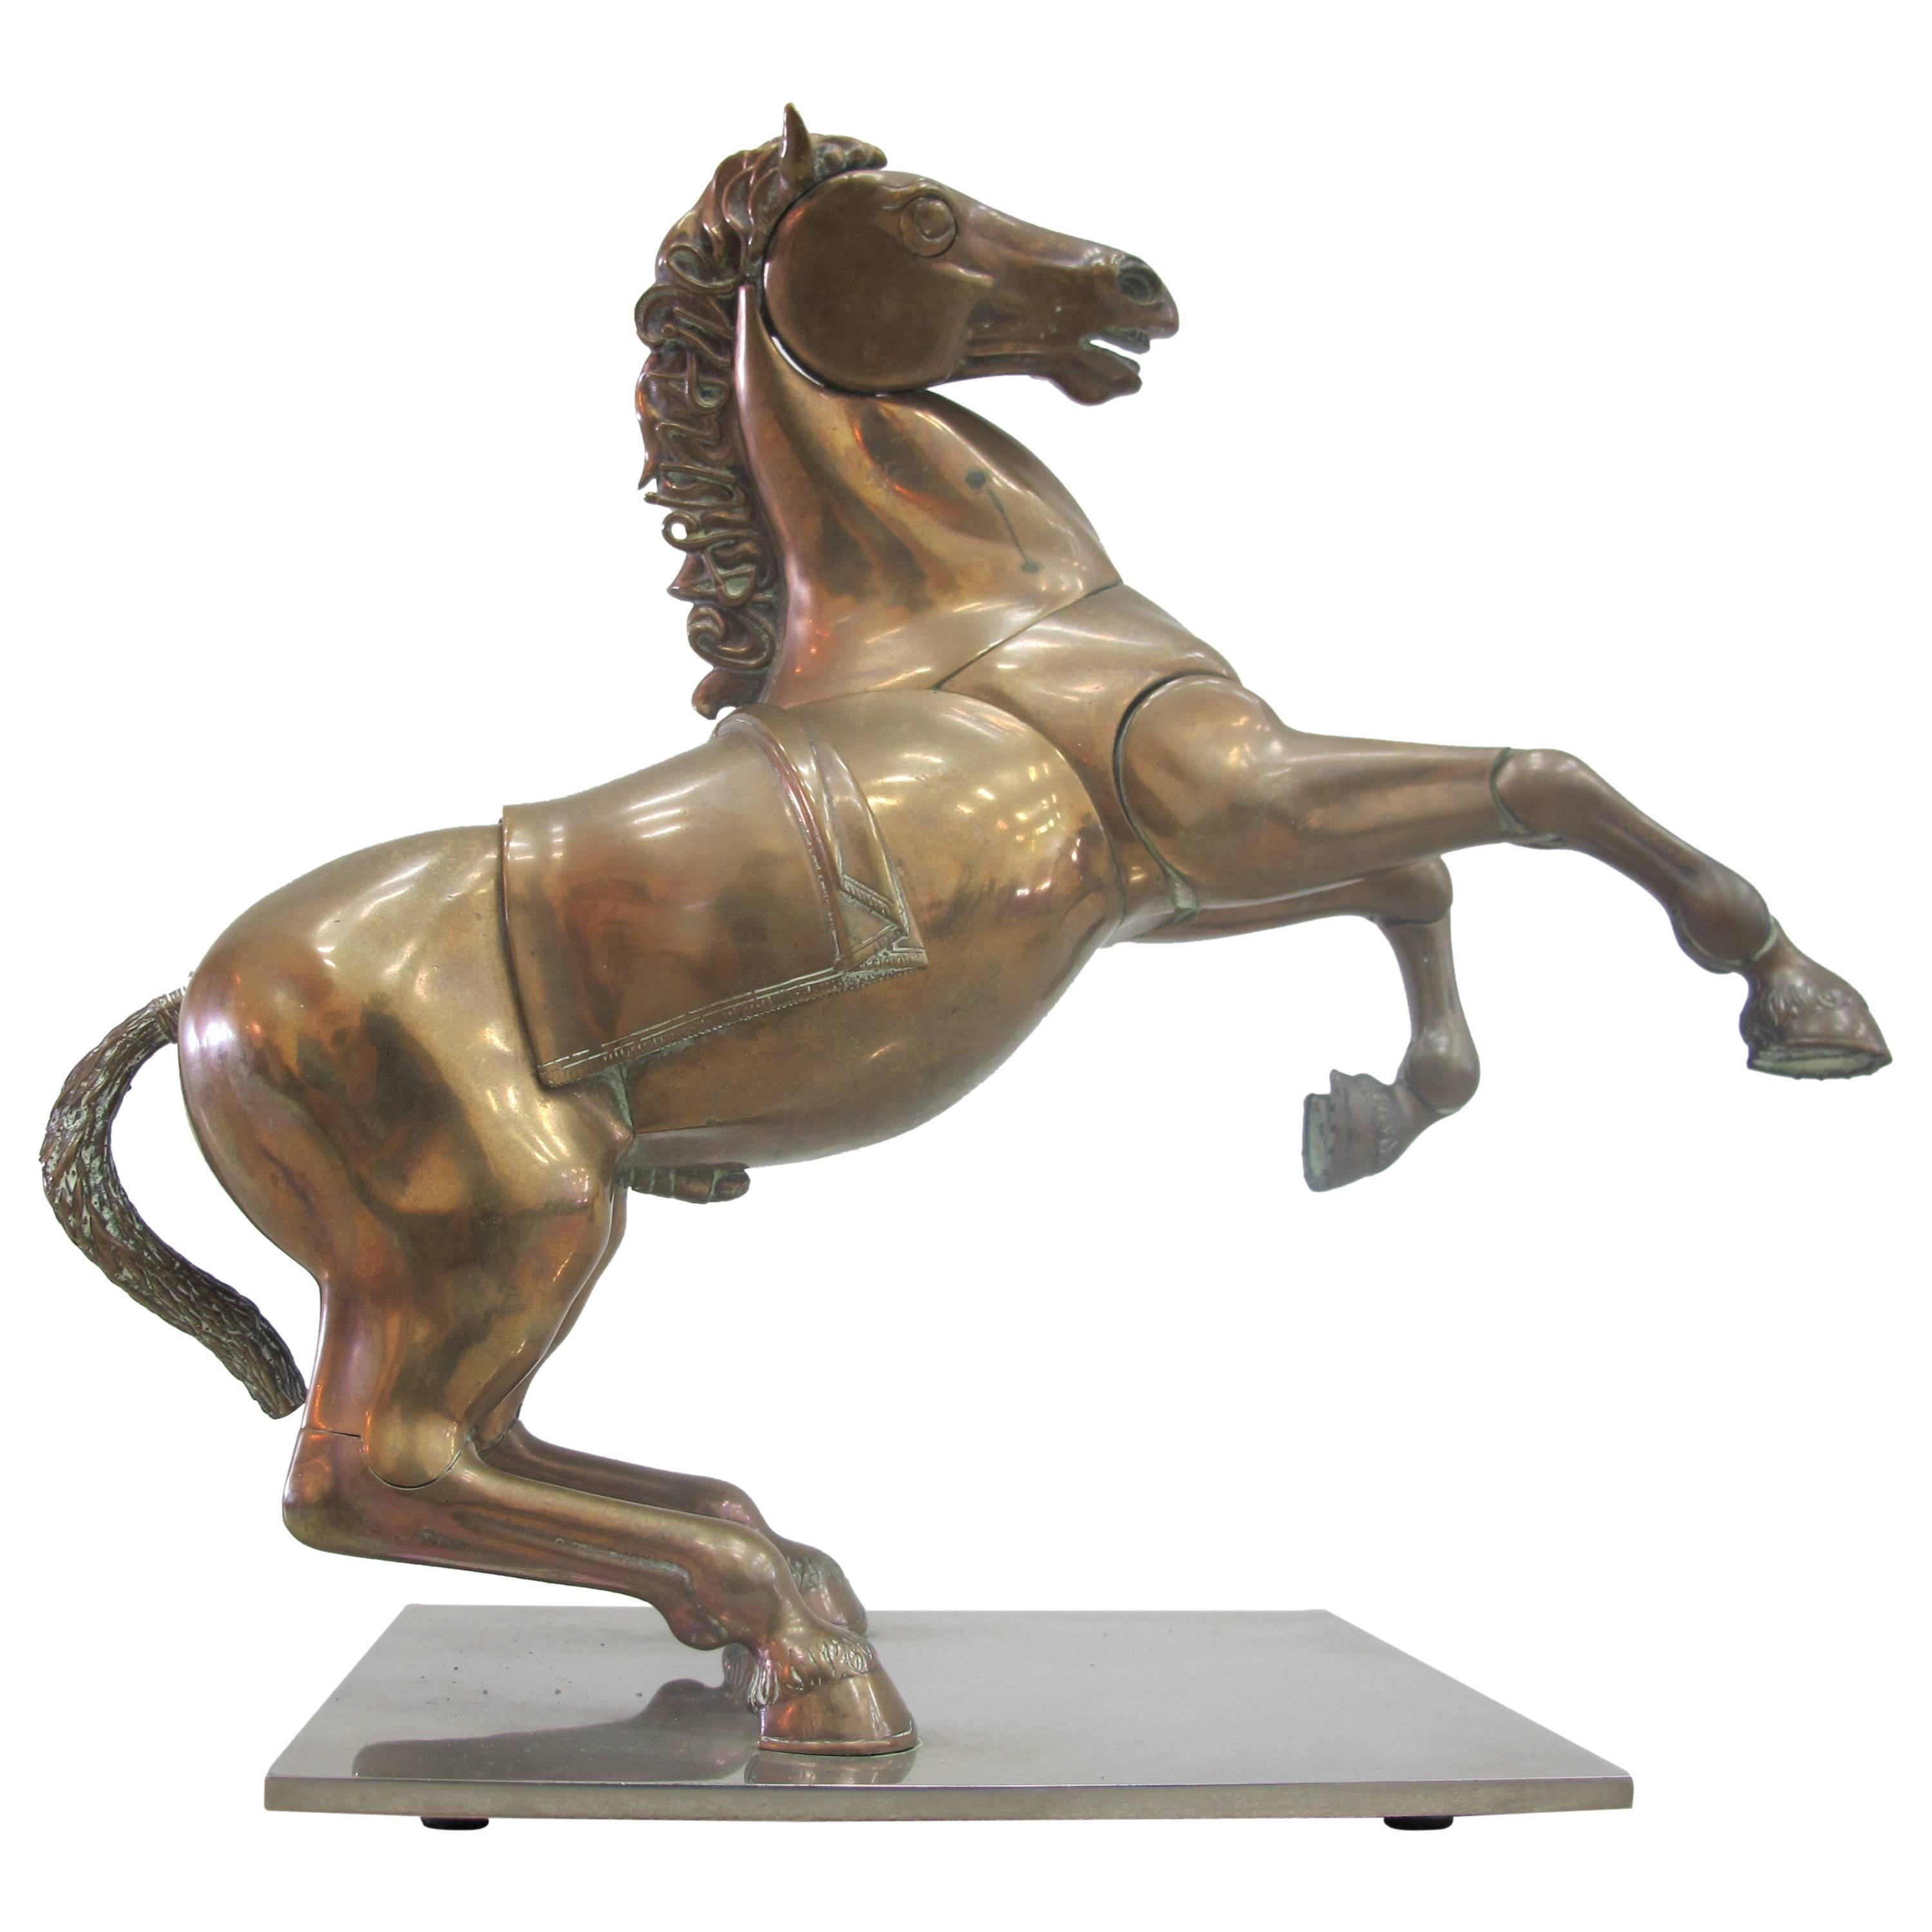 Caballo Casinaide by Miguel Berrocal